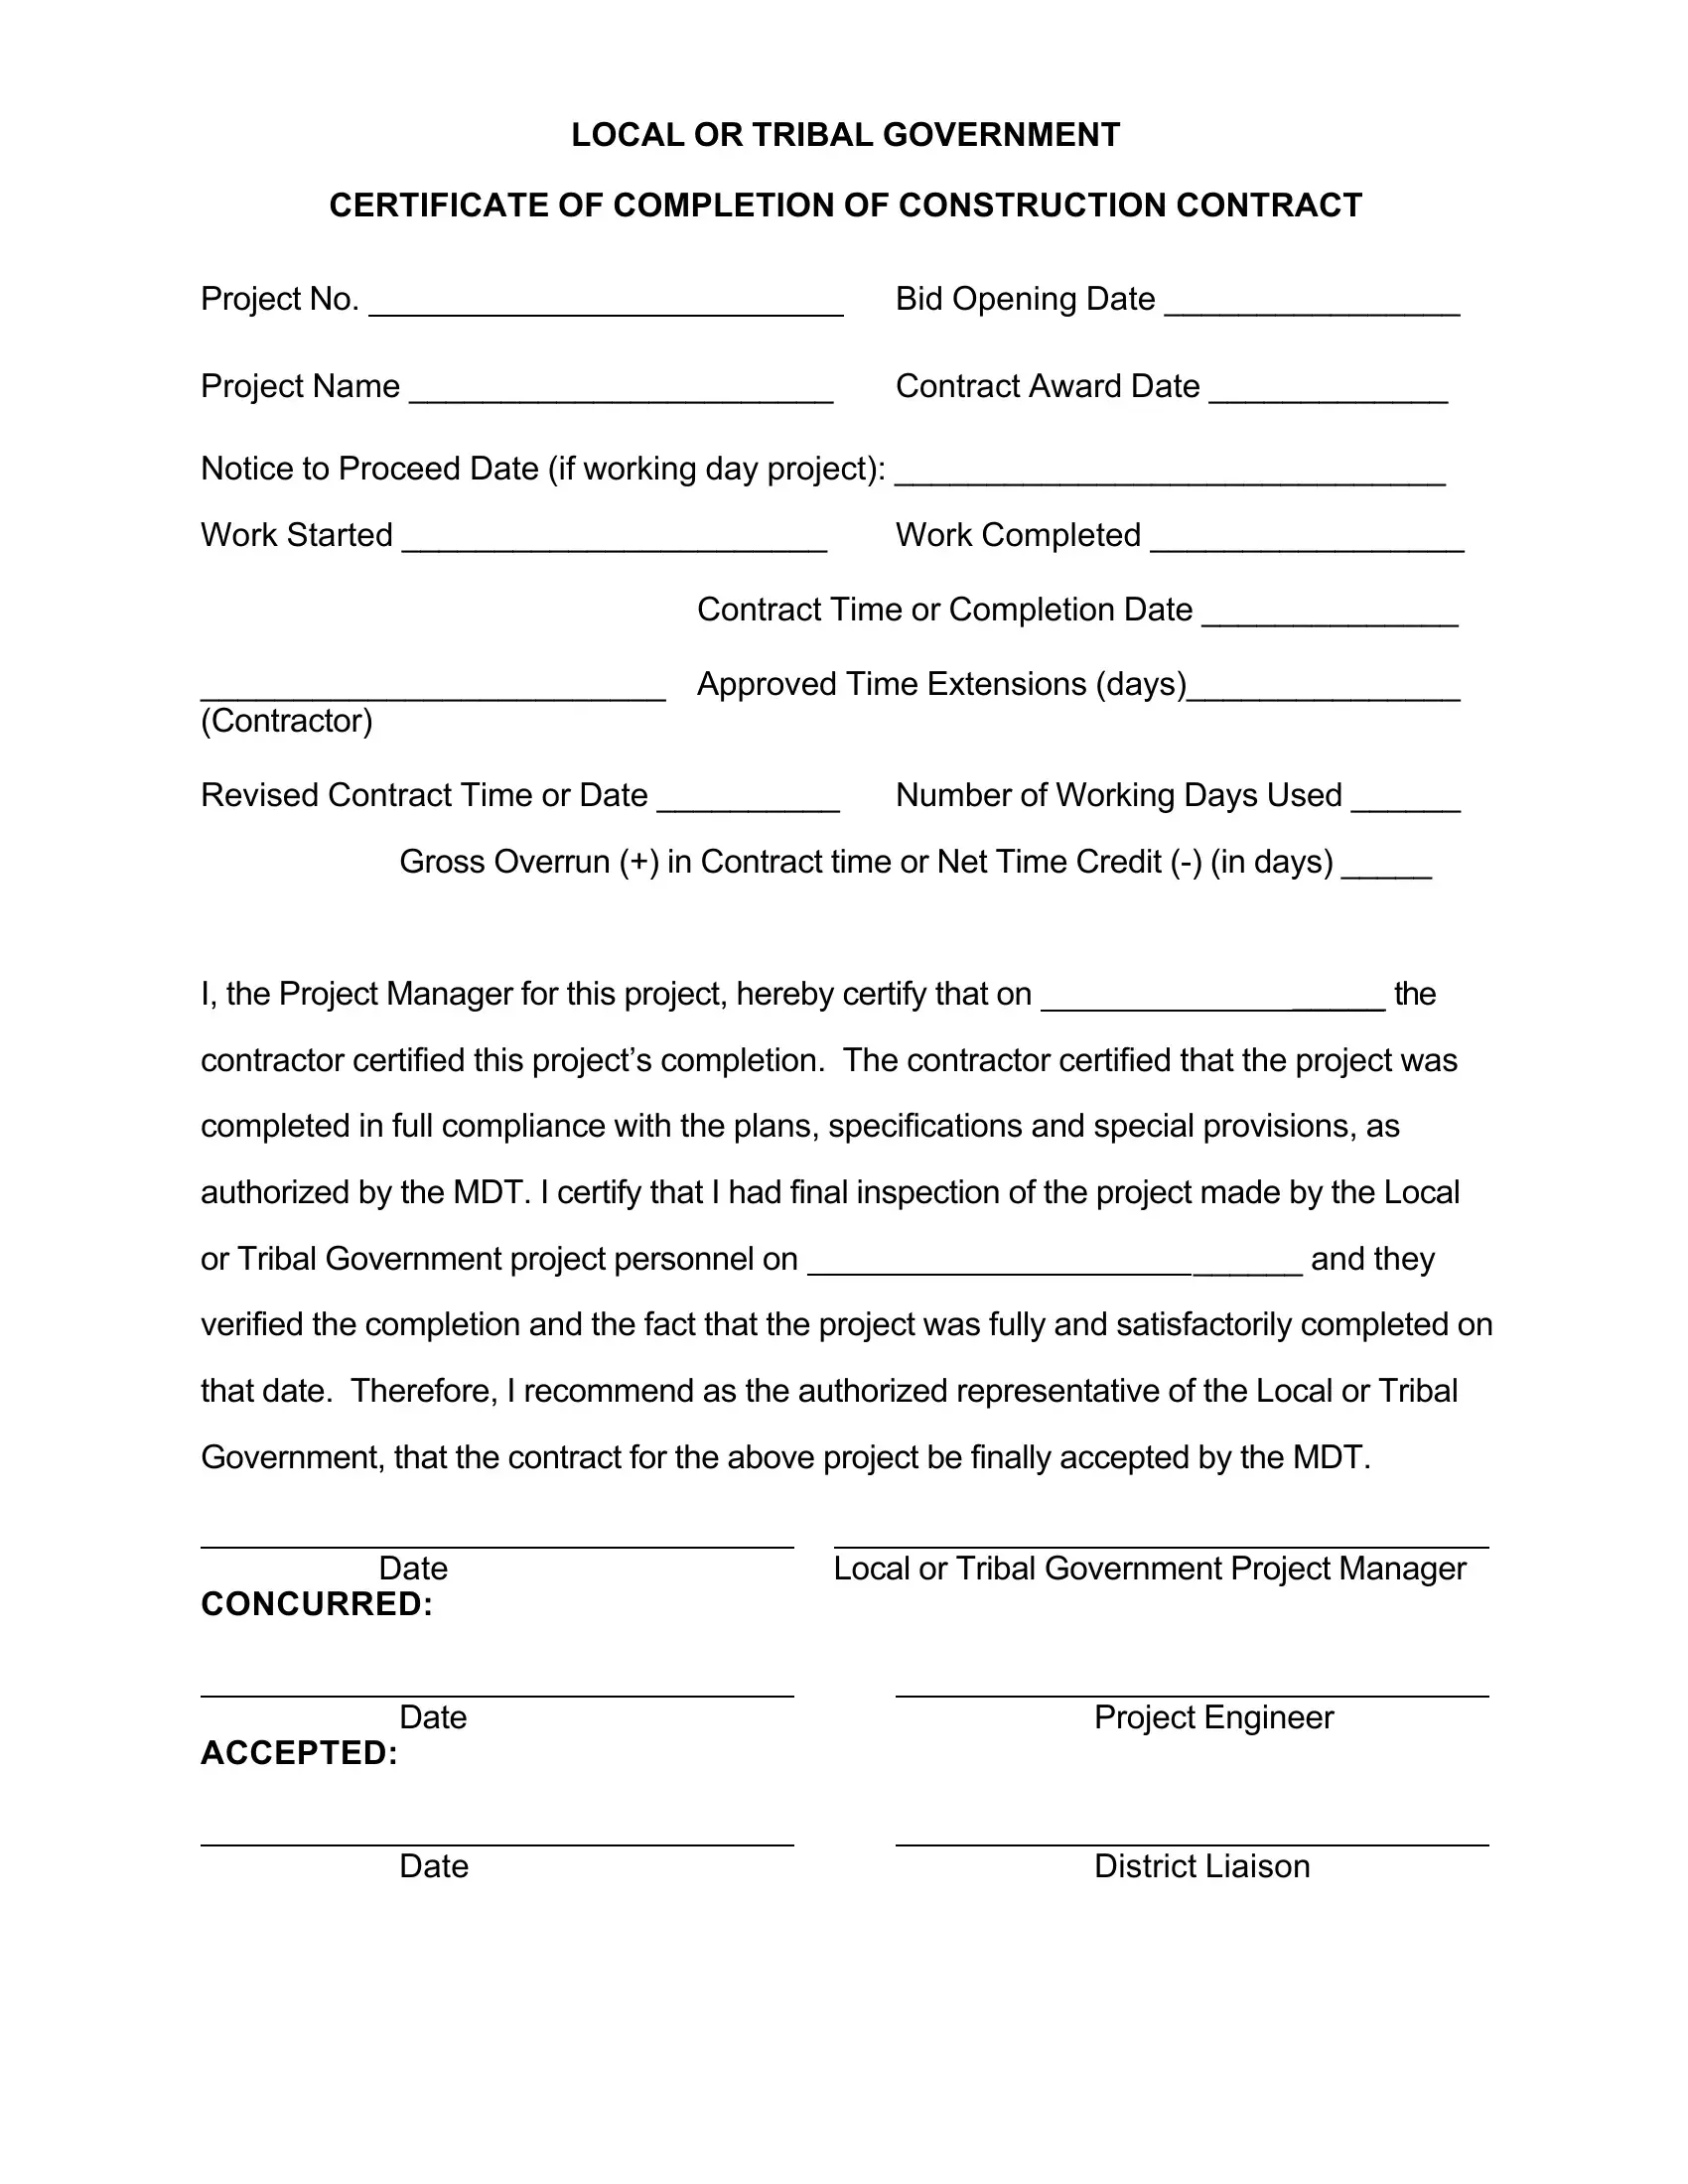 roof certification form template